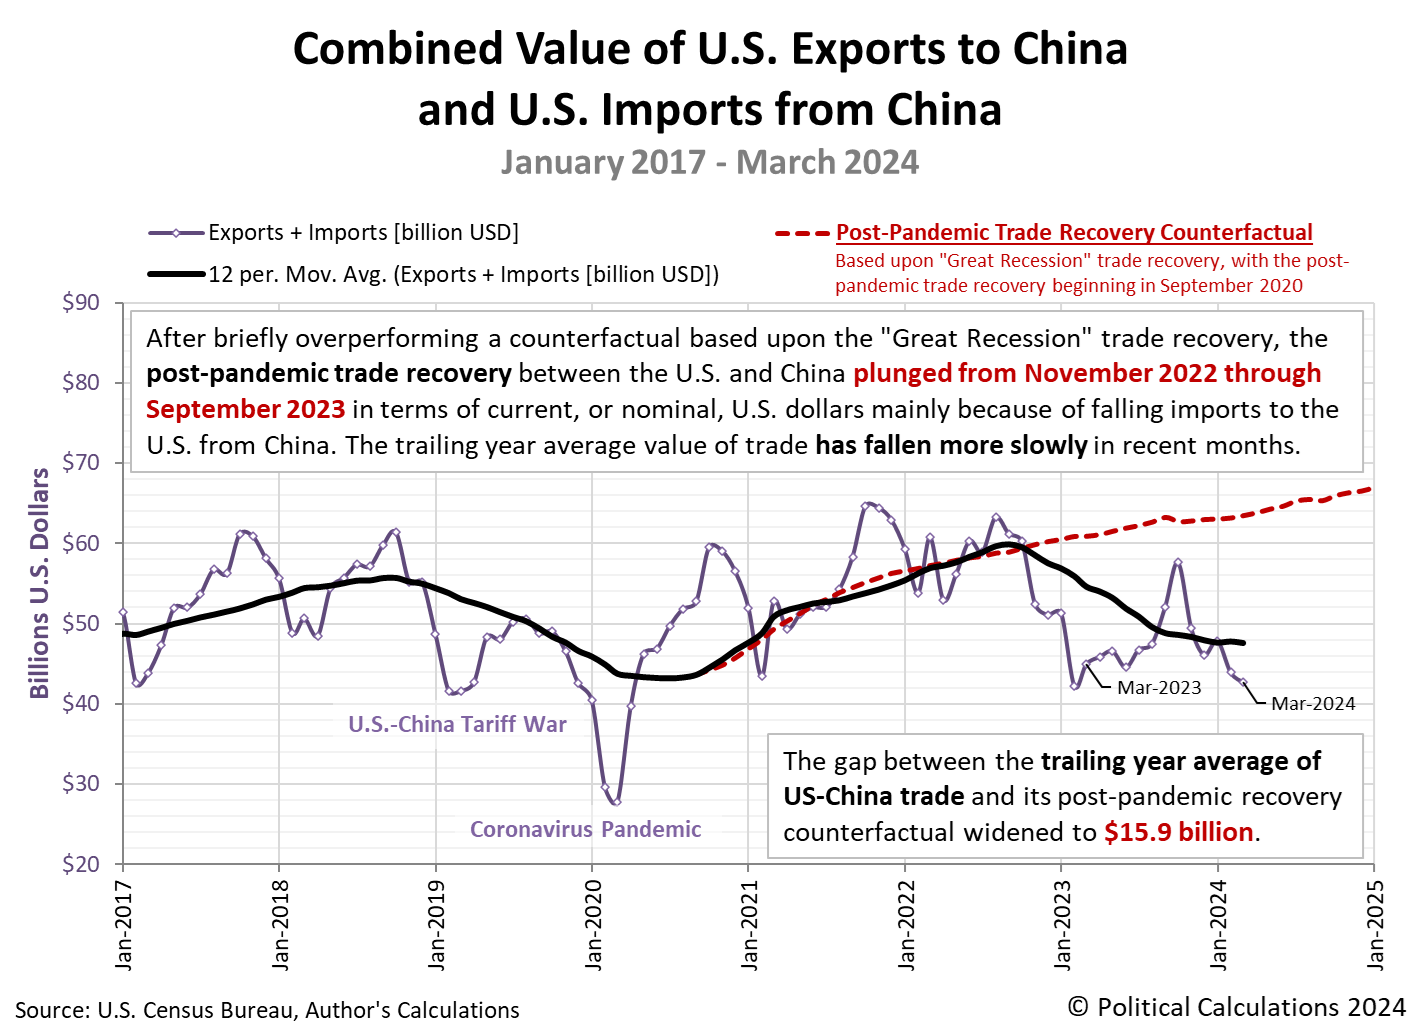 Combined Value of U.S. Exports to China and U.S. Imports from China, January 2017 - March 2024